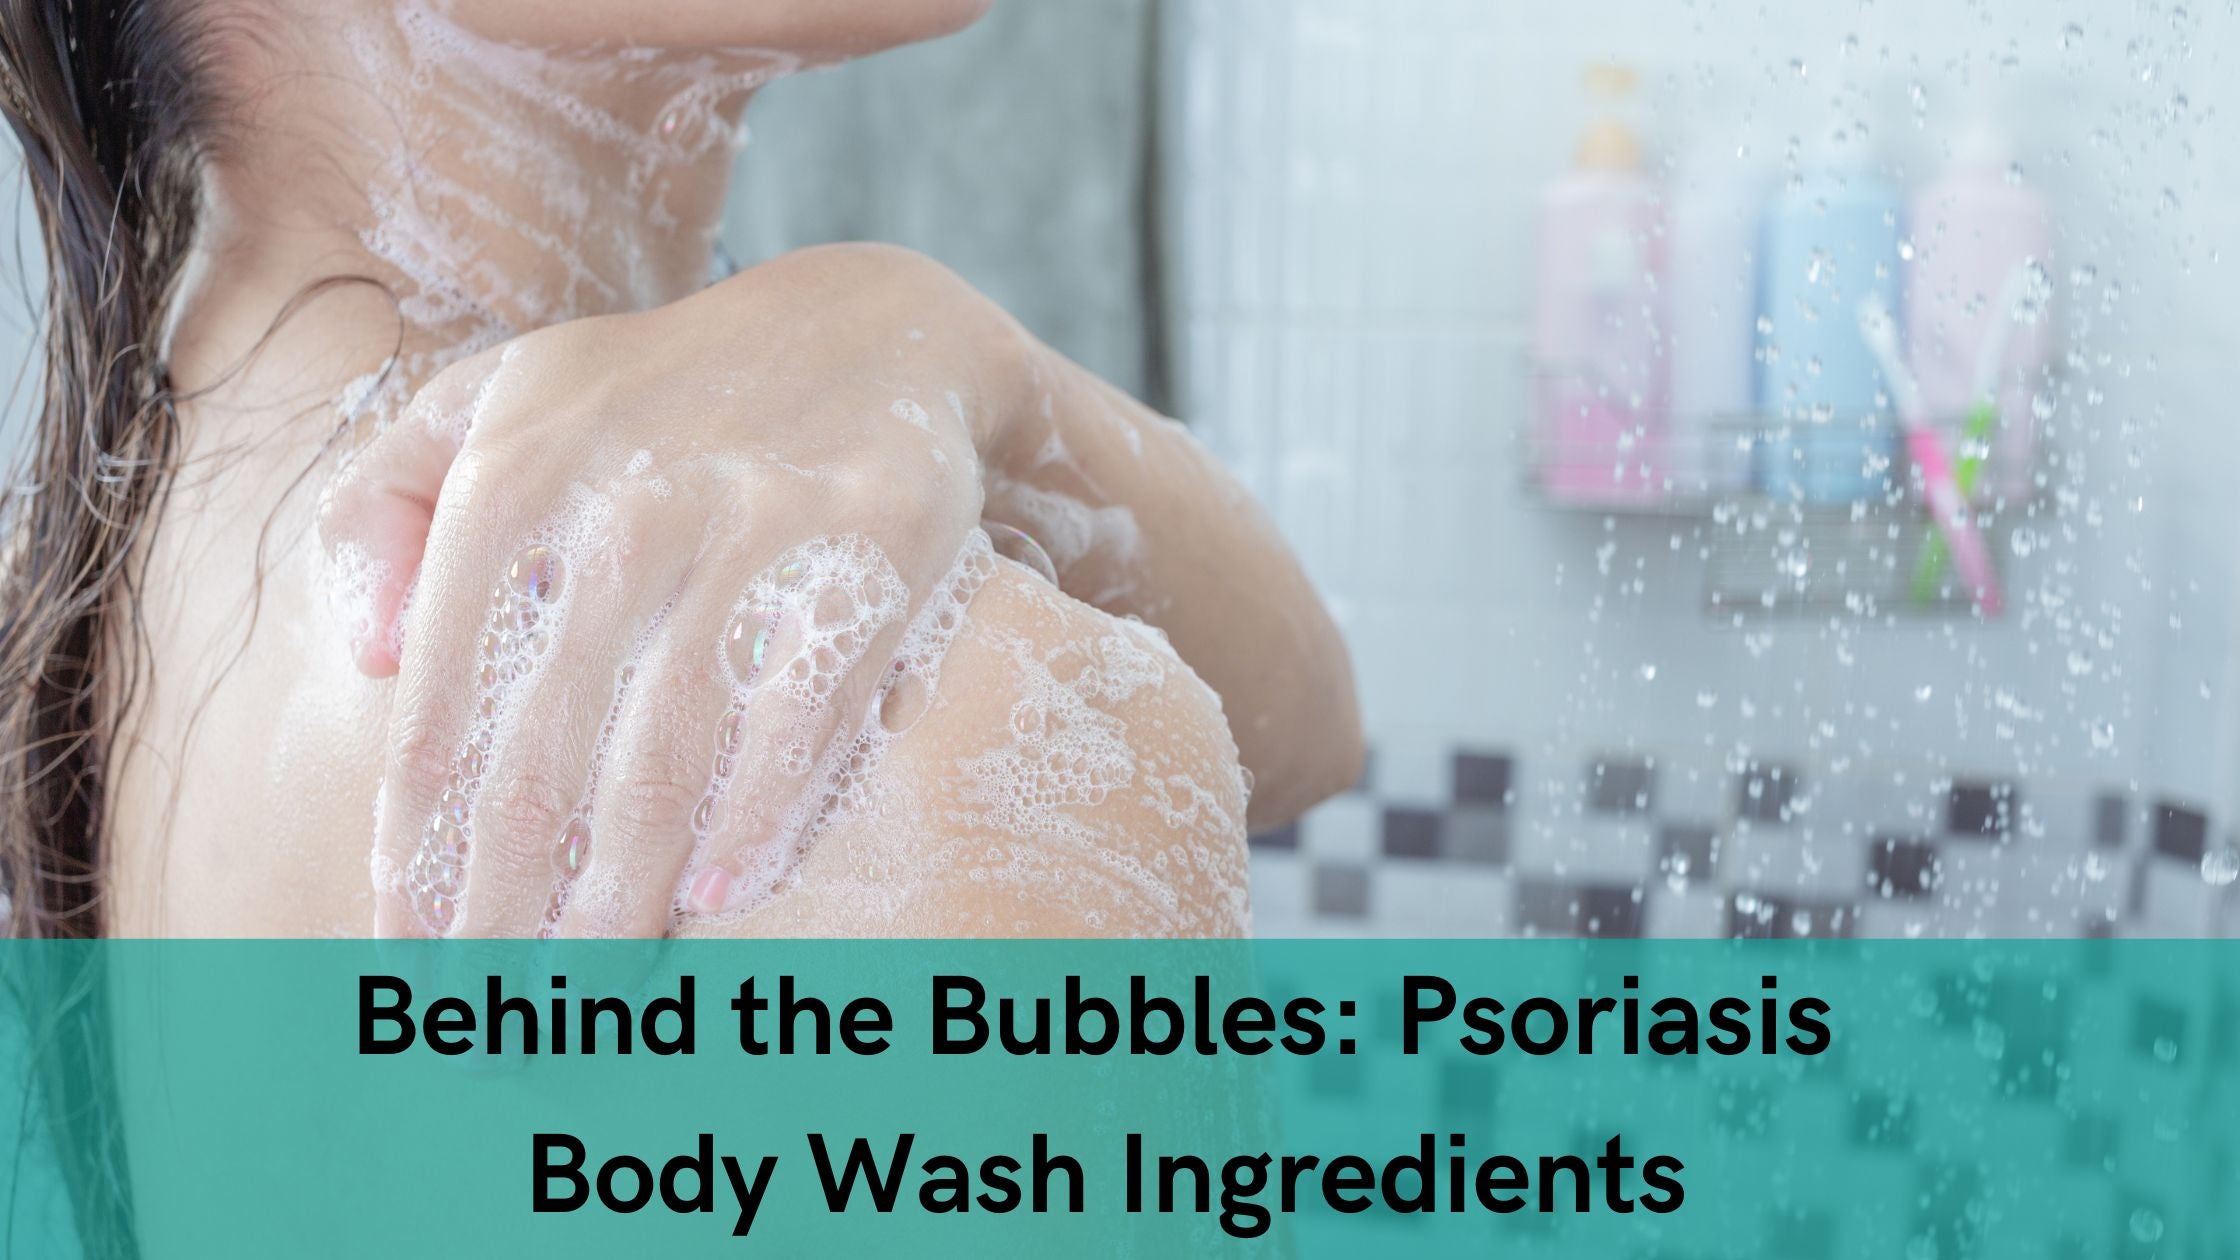 Behind the Bubbles: Psoriasis Body Wash Ingredients